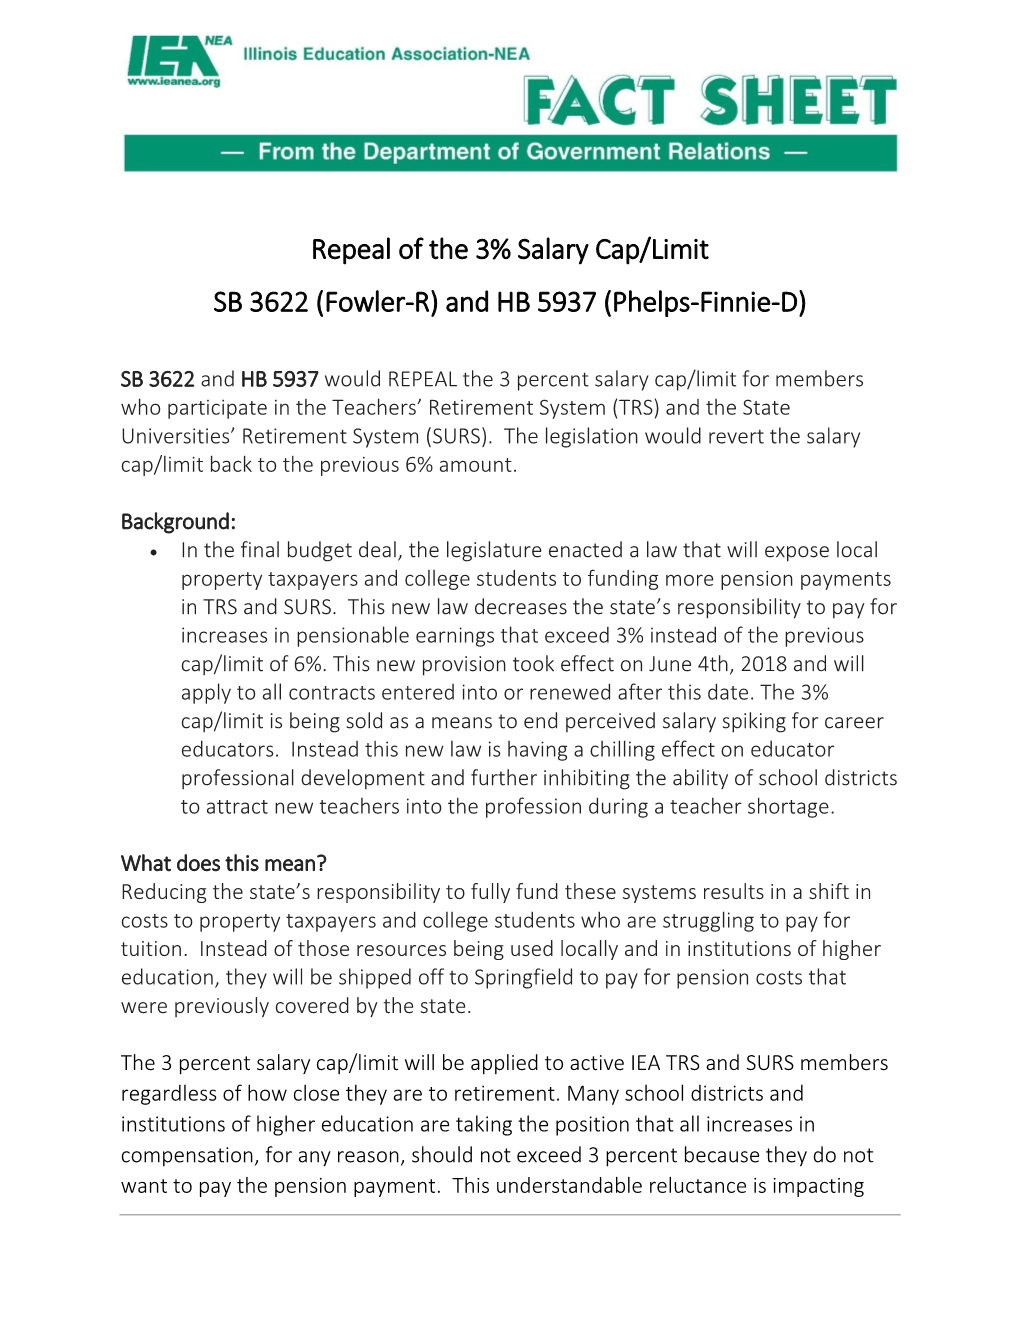 Repeal of the 3% Salary Cap/Limit SB 3622 (Fowler-R) and HB 5937